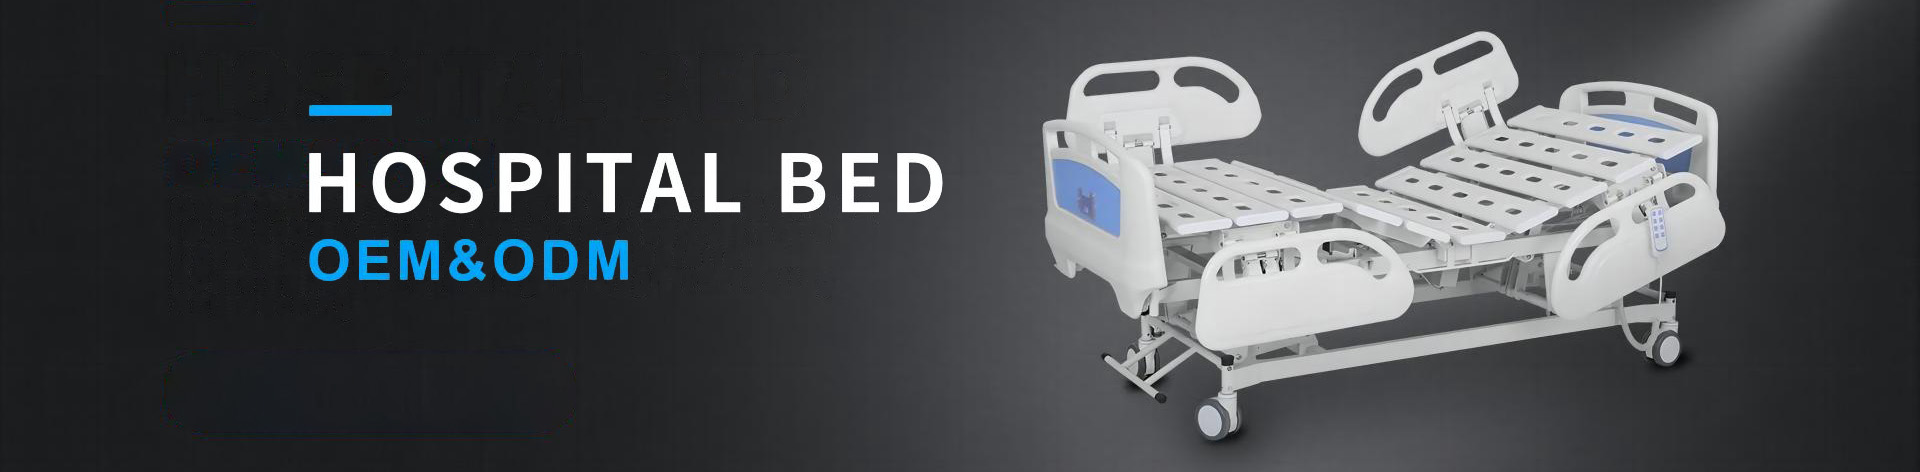 Five-FunctionElectricHospitalBed-HospitalBeds,Medicalbeds,ElectricBeds,FlatBeds,IcuBeds